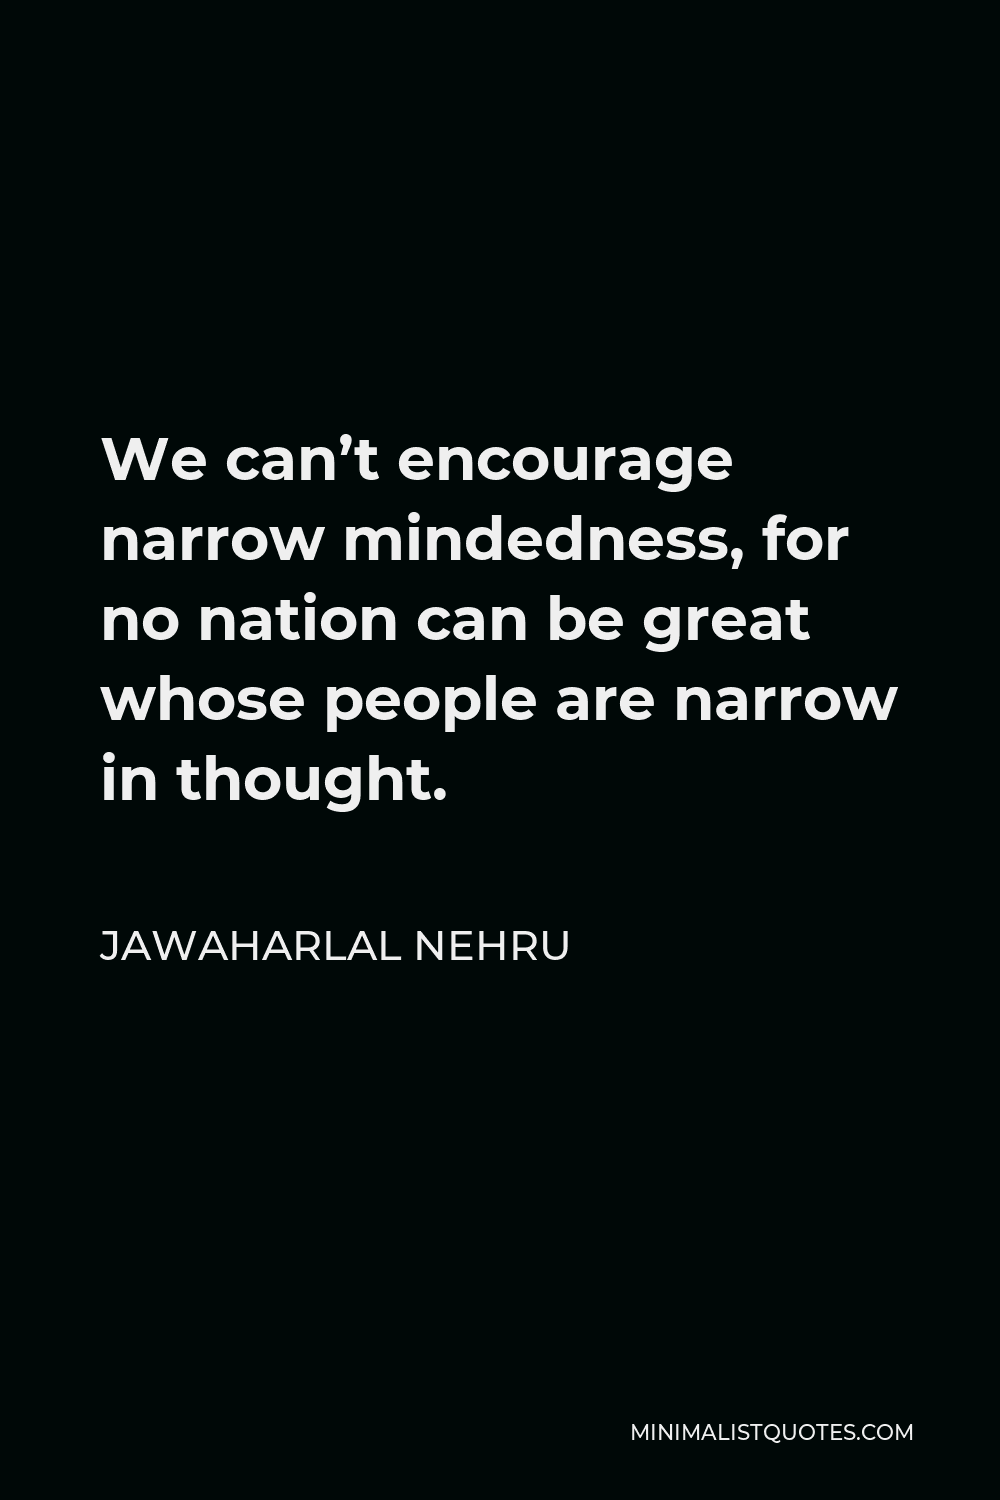 Jawaharlal Nehru Quote - We can’t encourage narrow mindedness, for no nation can be great whose people are narrow in thought.